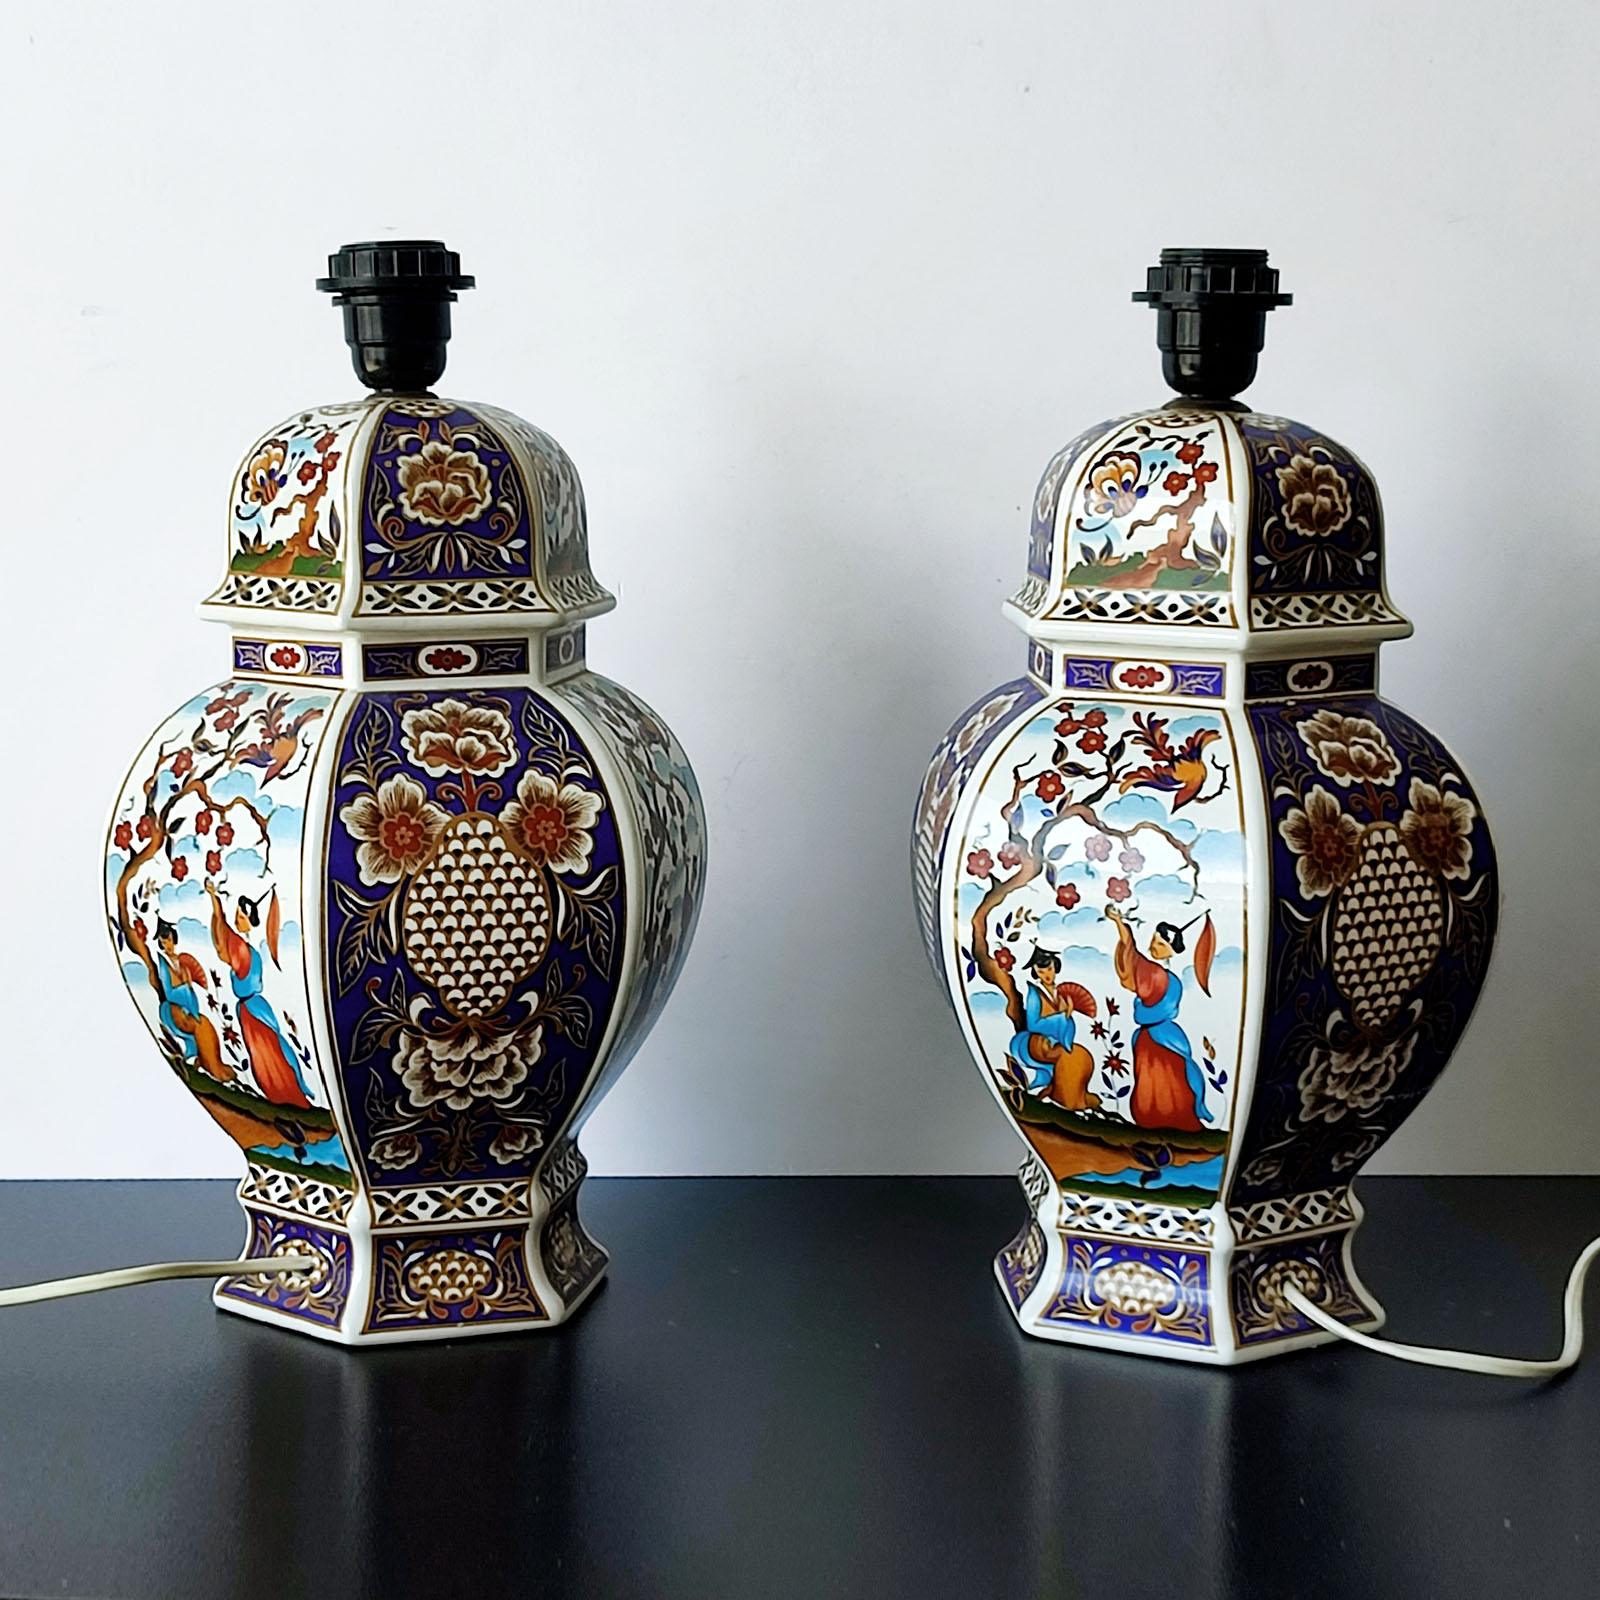 Pair of Japanese Porcelain Table Lamps and a Lidded Urn, Mid-20th Century For Sale 2